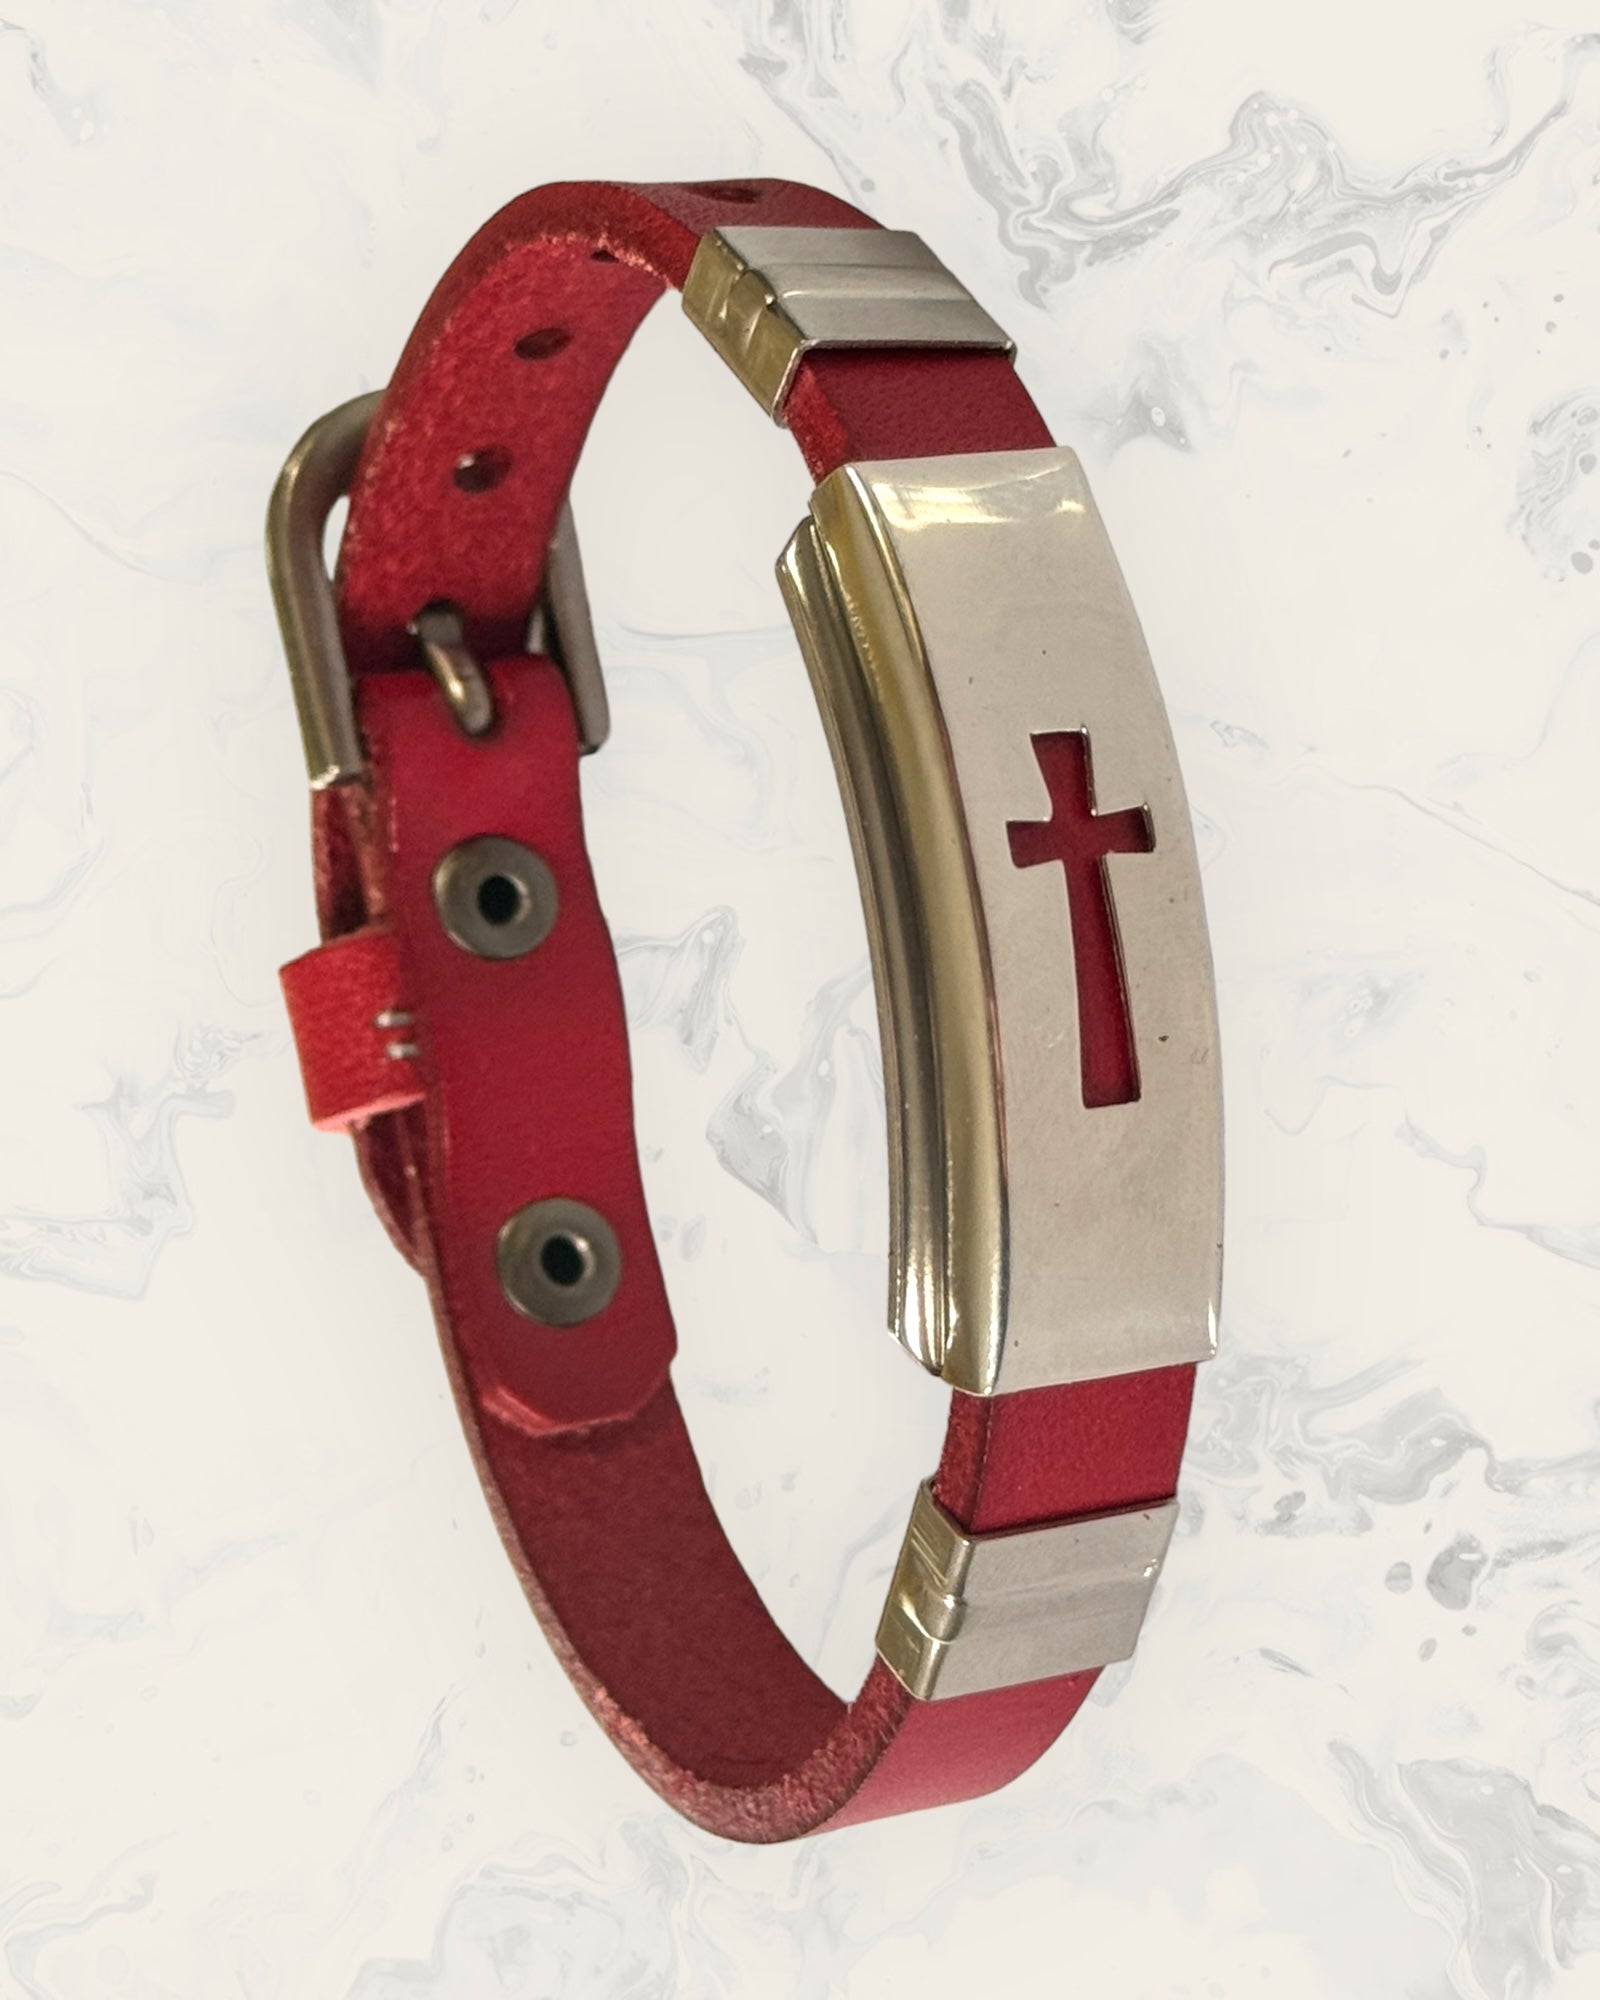 Natural Pain Relief and EMF Protection Bracelet Leather Band Color Red with Cross design on a silver metal slider